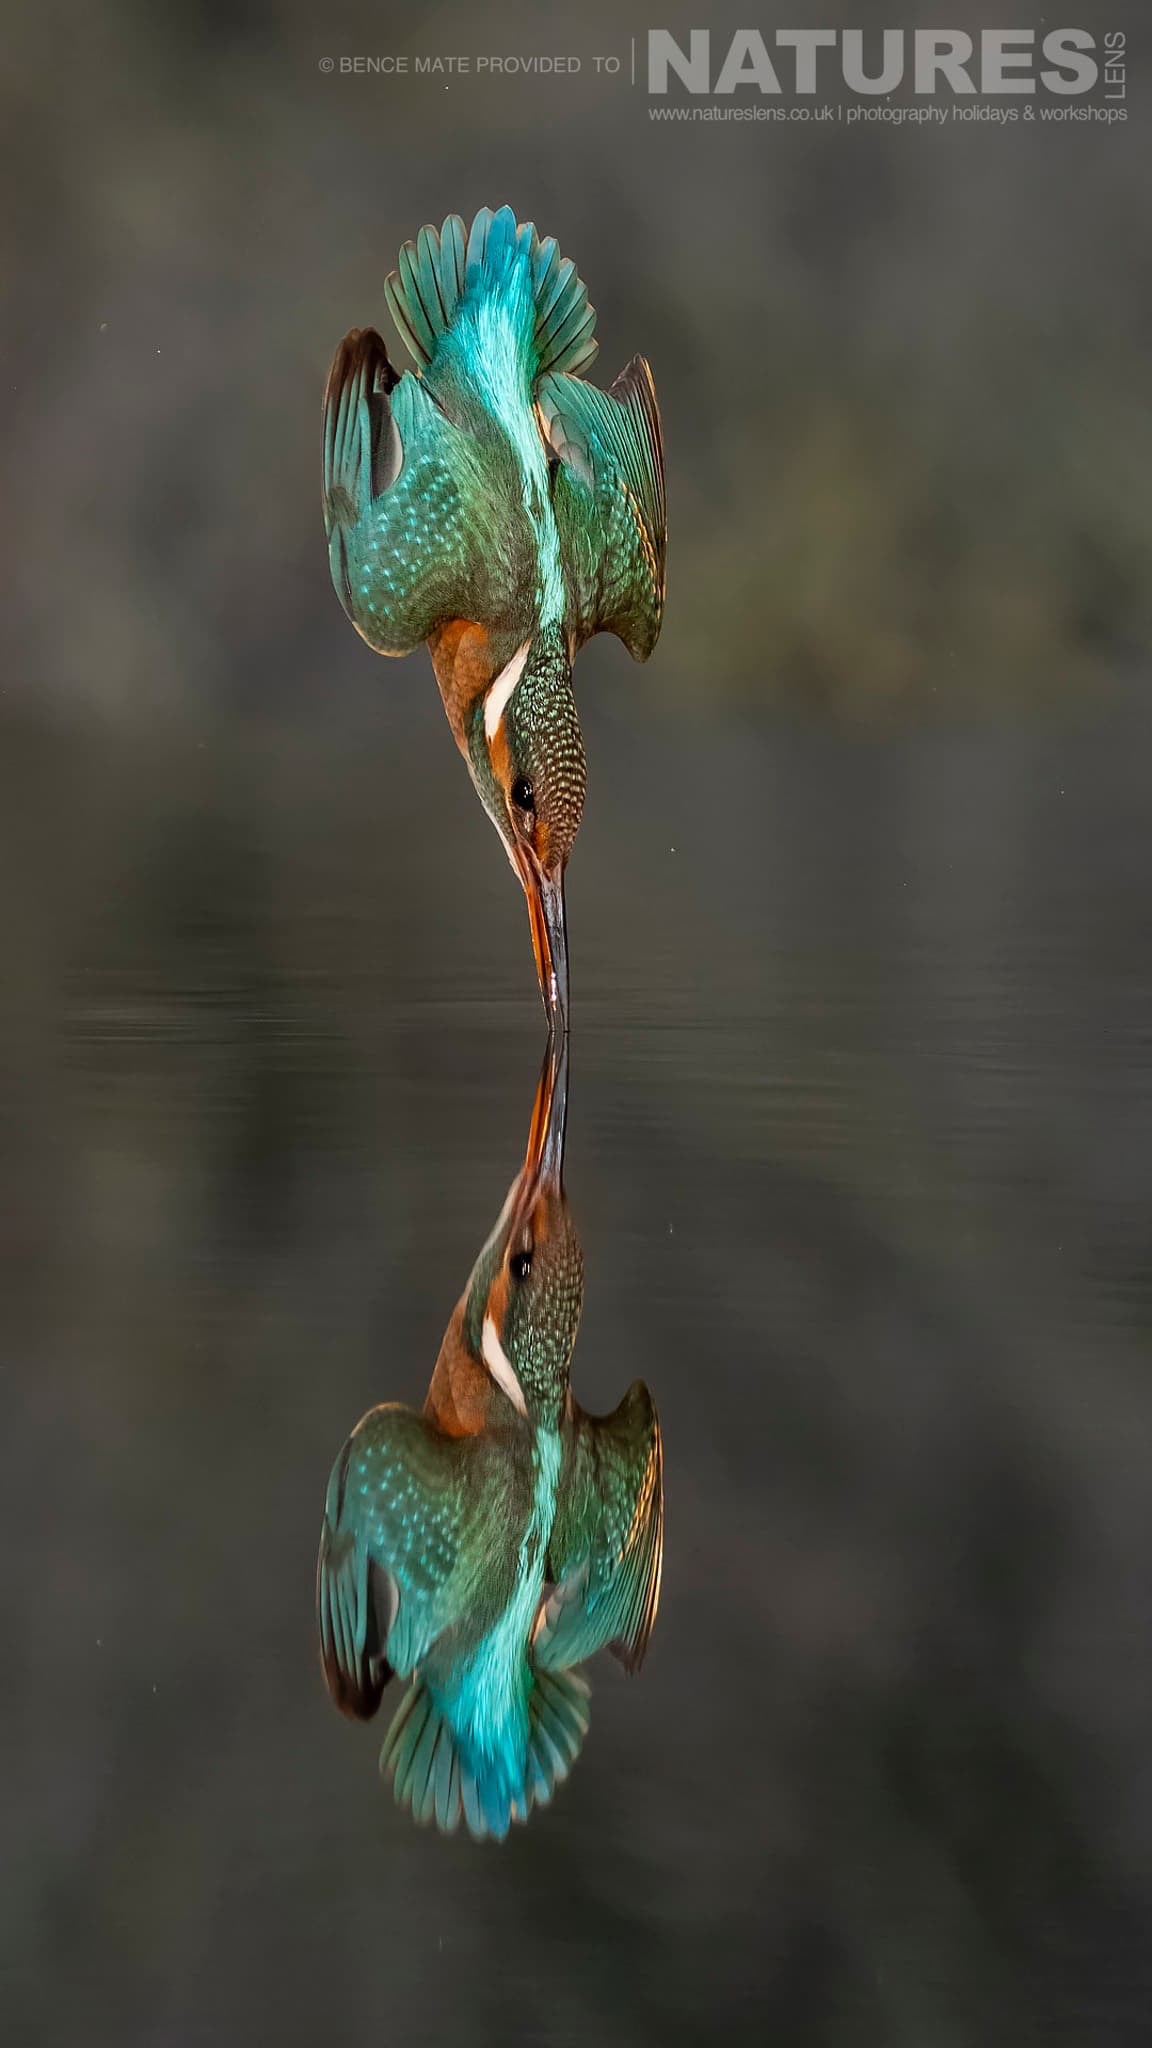 A kingfisher takes to the water at Bence Mátés Photography Hides during the Hungarian Winter